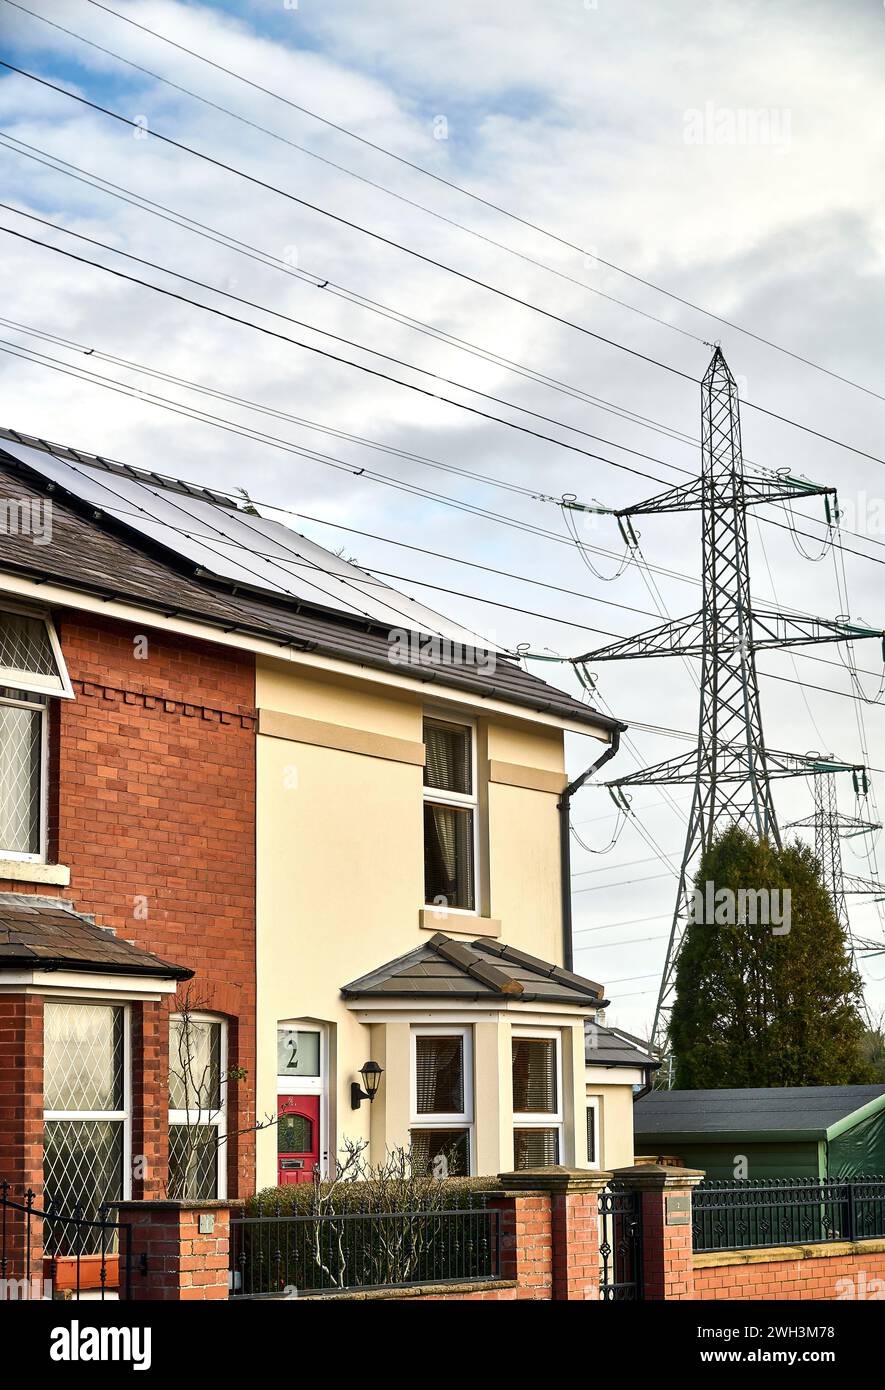 House with solar panels on roof sitting below national grid power lines and pylon showing two forms of electricity generation Stock Photo